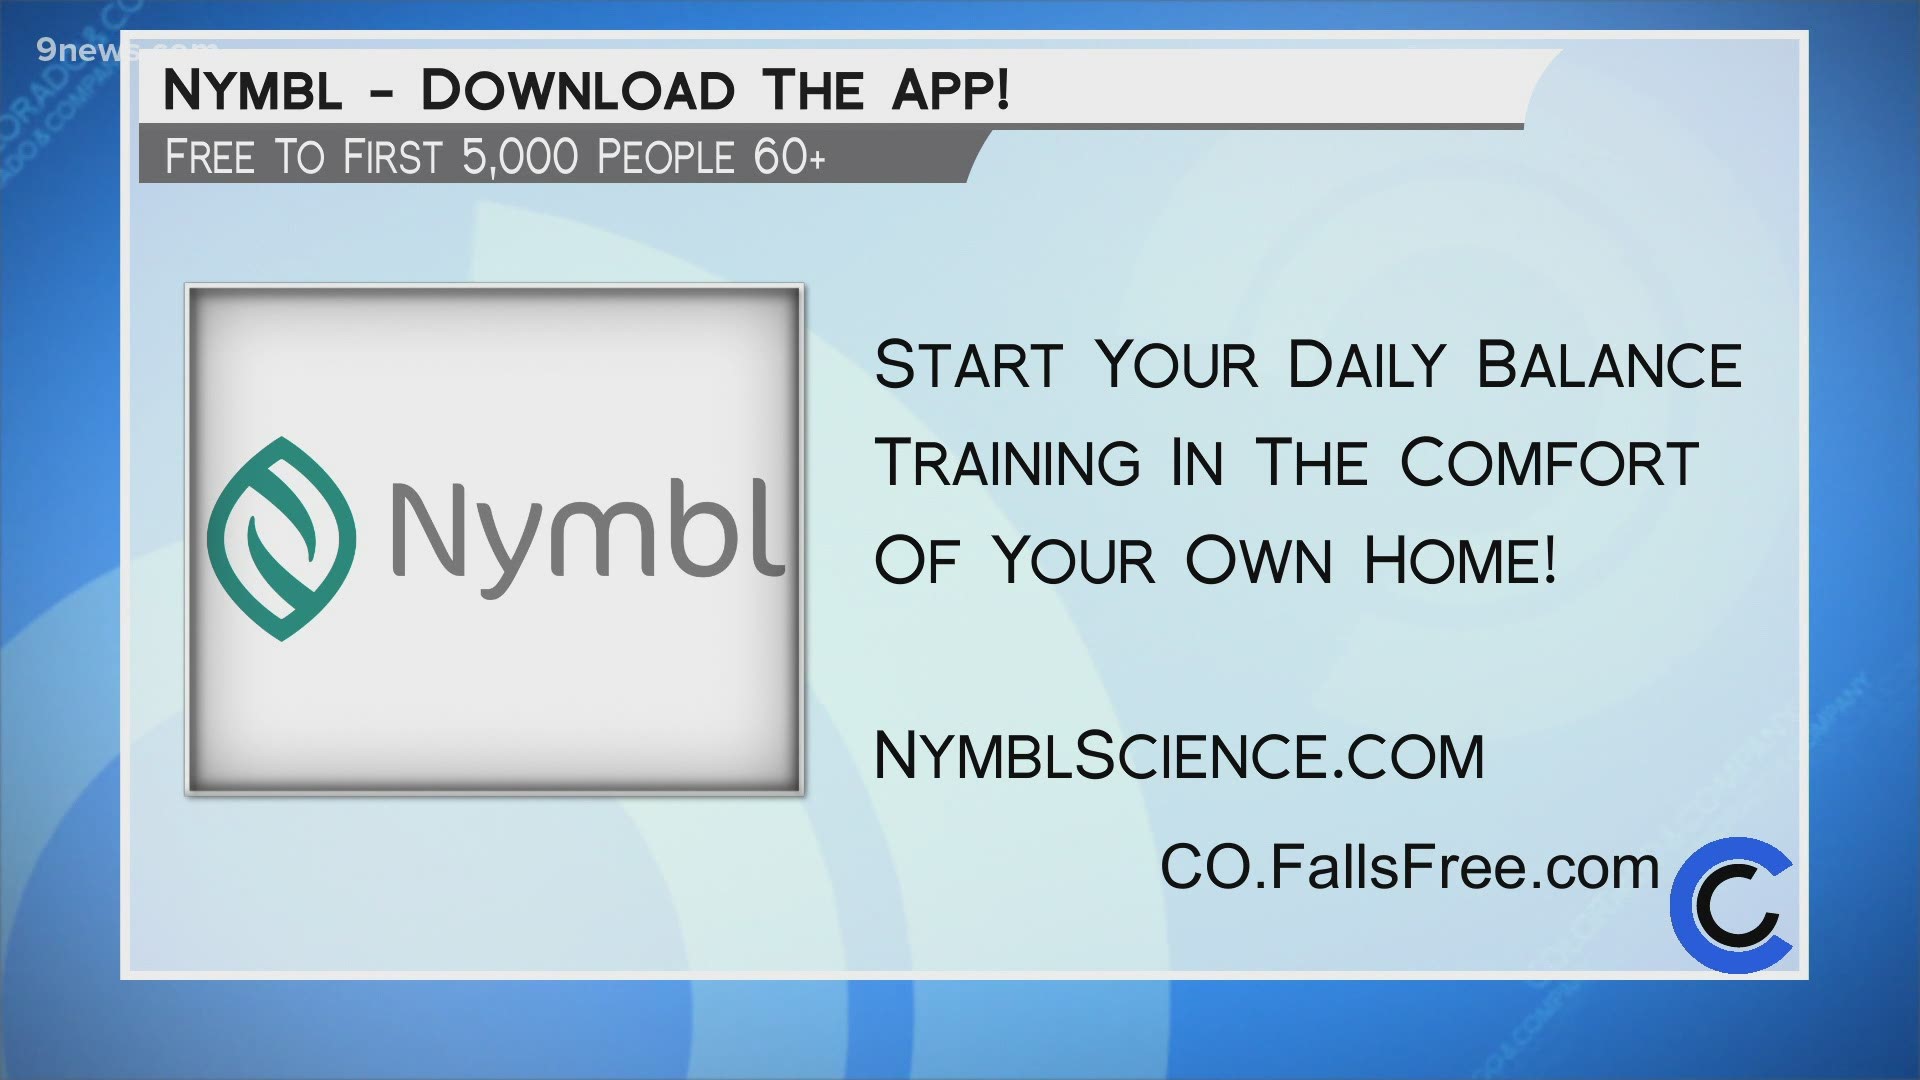 Nymbl is free to the first 5k Coloradans, aged 60 and up. Learn more about getting started at CO.FallsFree.com.